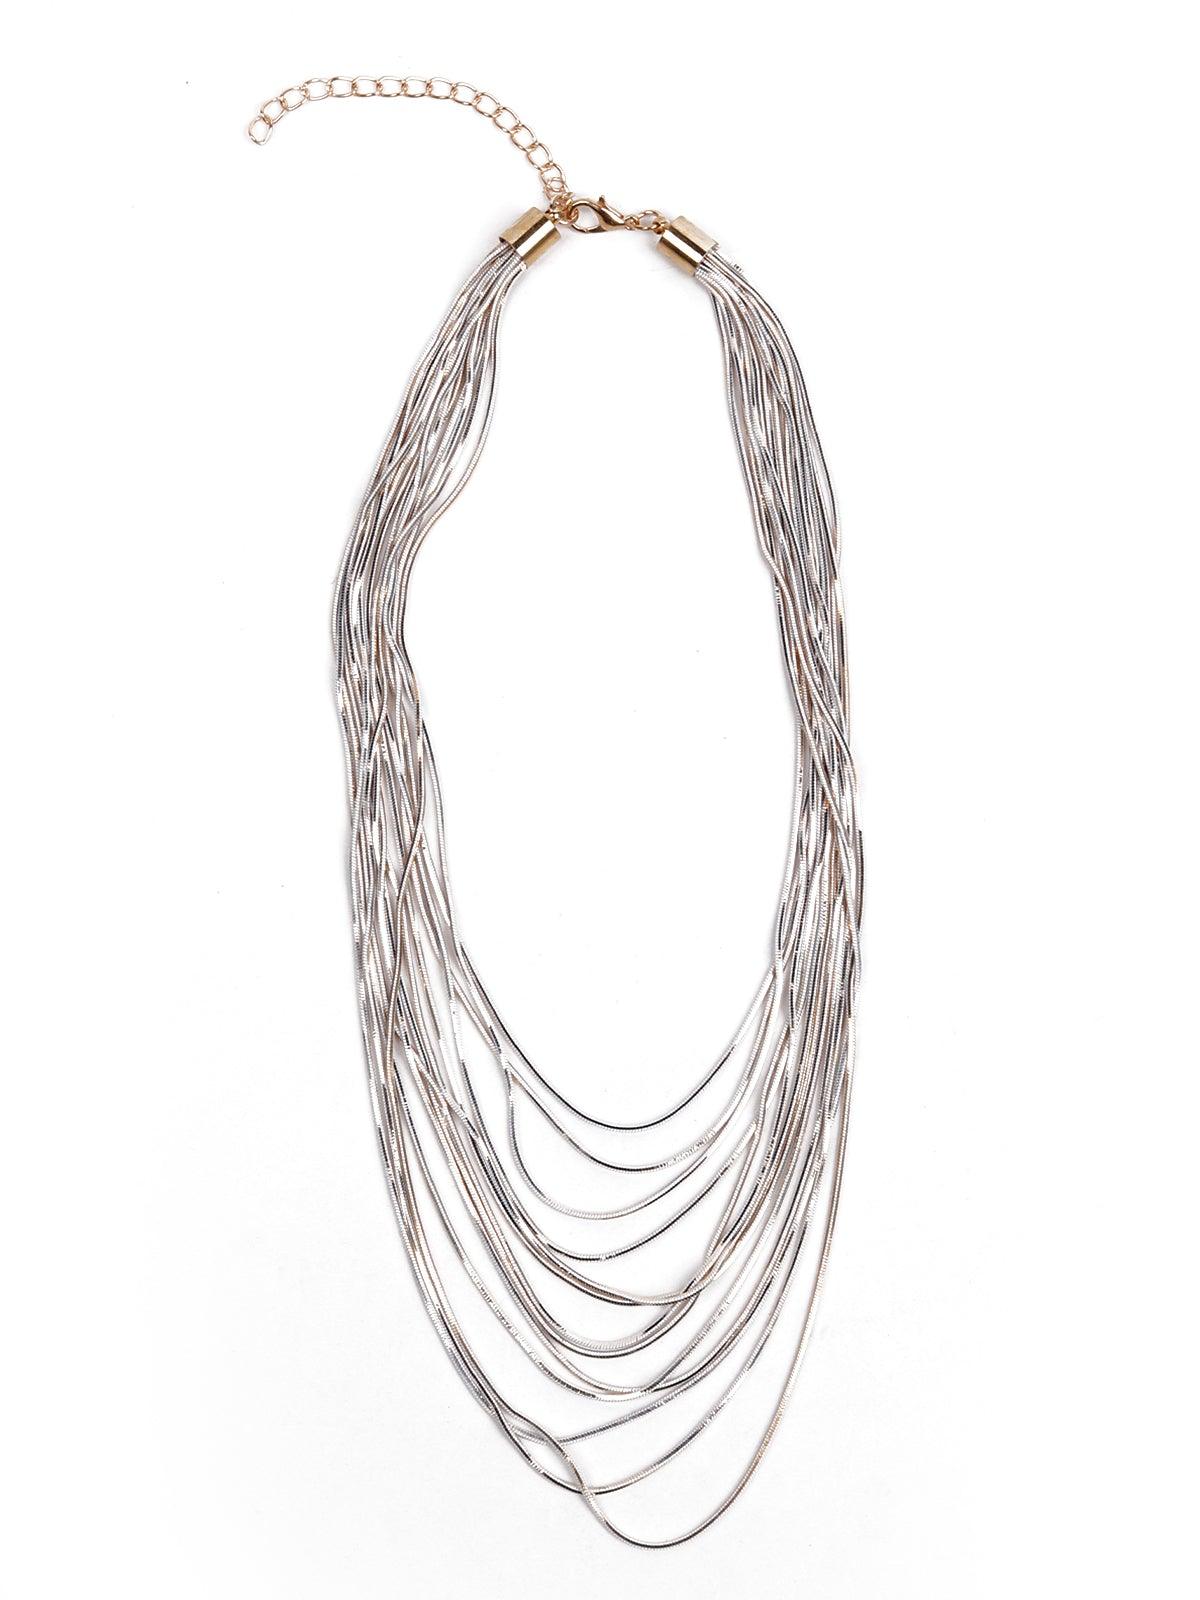 Women's Multiple Layered Metallic Silver Necklace - Odette